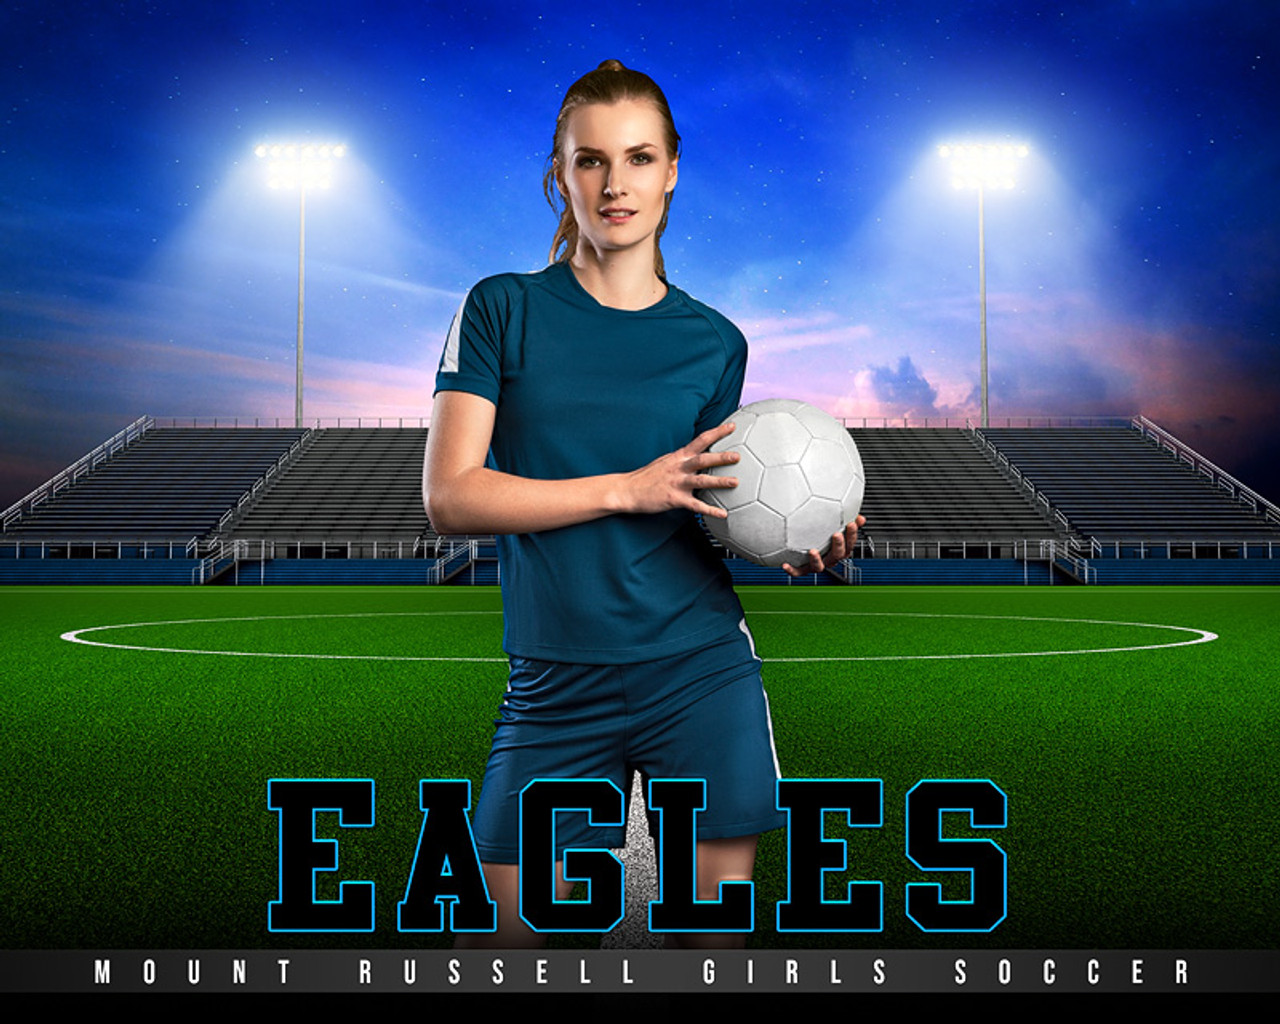 SPORTS POSTER PHOTO TEMPLATE - HOME TURF - SOCCER - CUSTOM PHOTOSHOP LAYERED SPORTS TEMPLATE